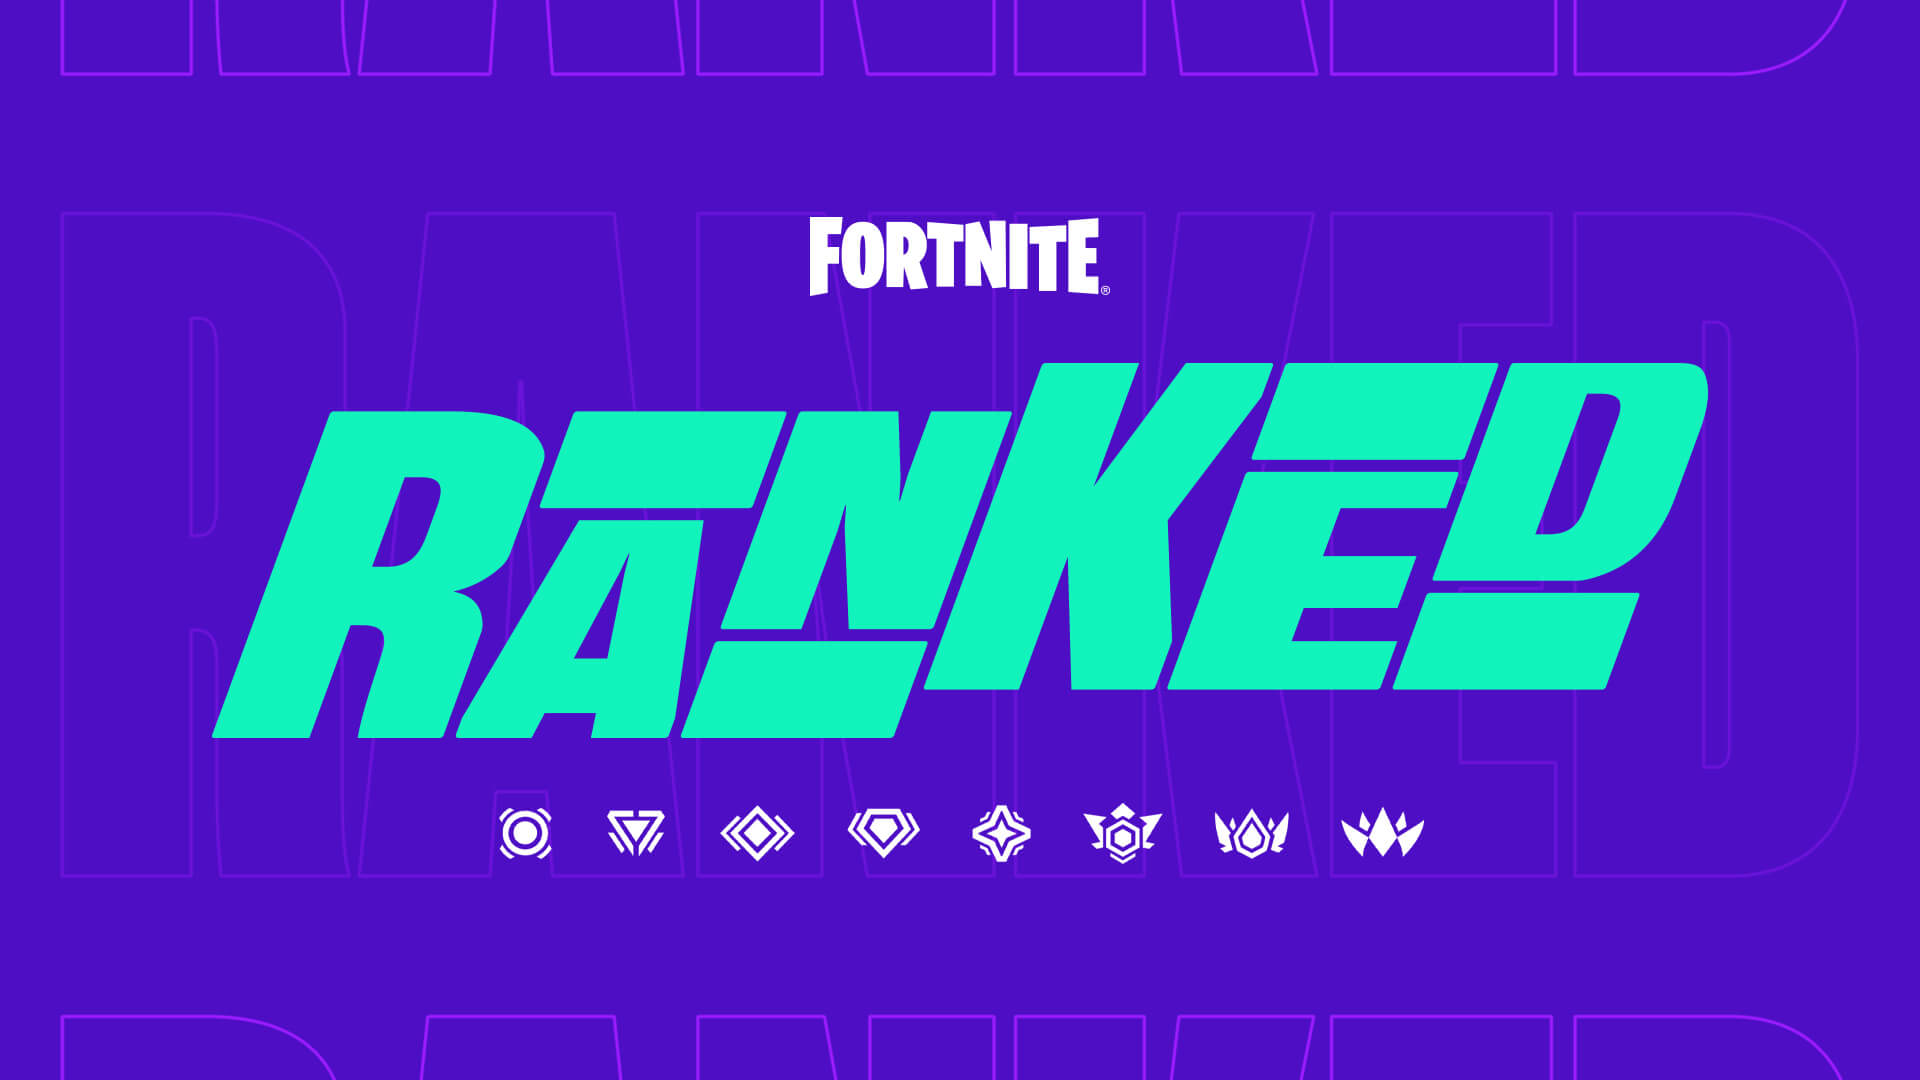 What We Know About Fortnite's New Ranked Mode - Esports Illustrated